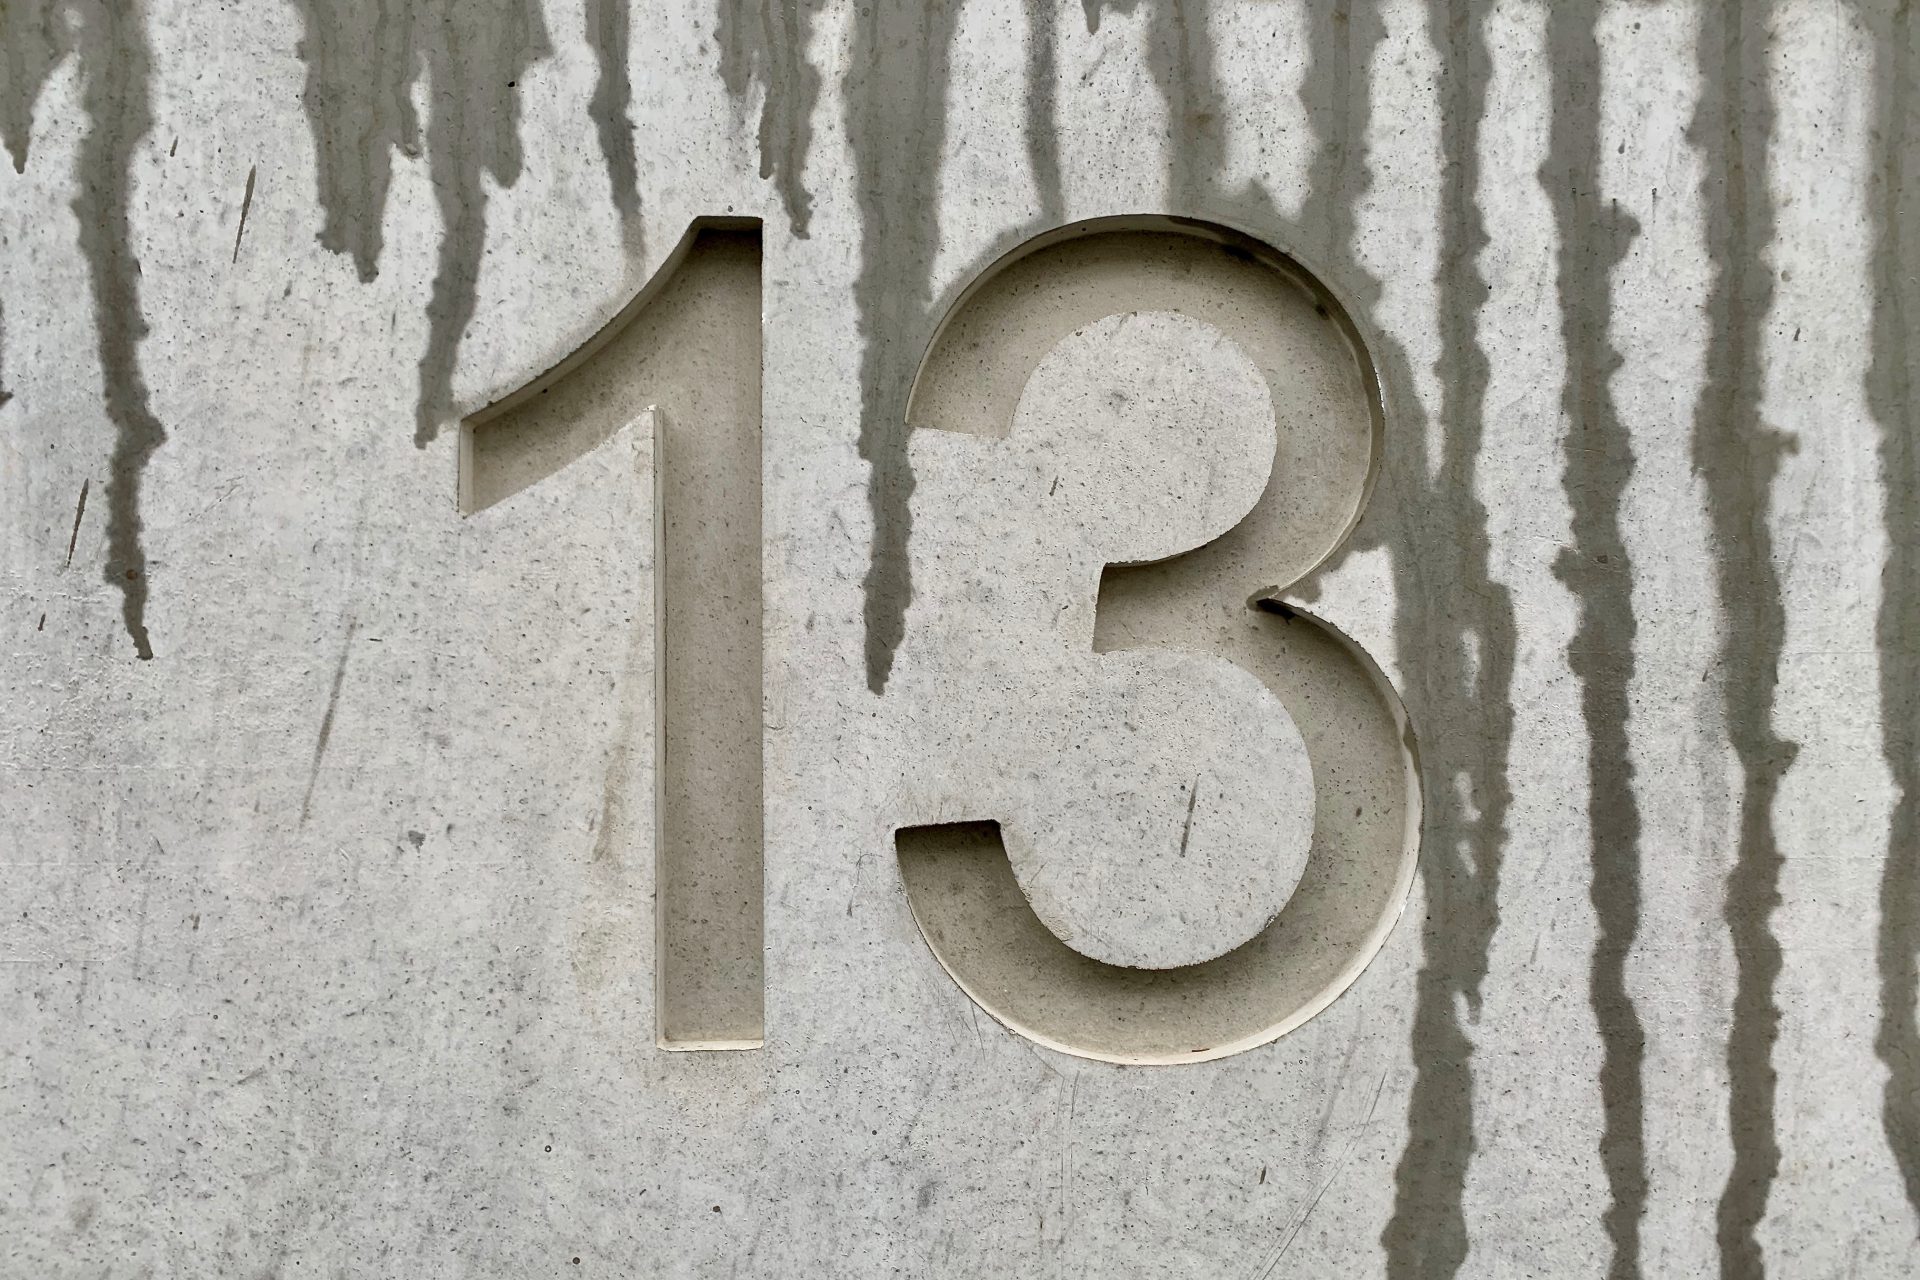 Triskaidekaphobia is nothing to worry about